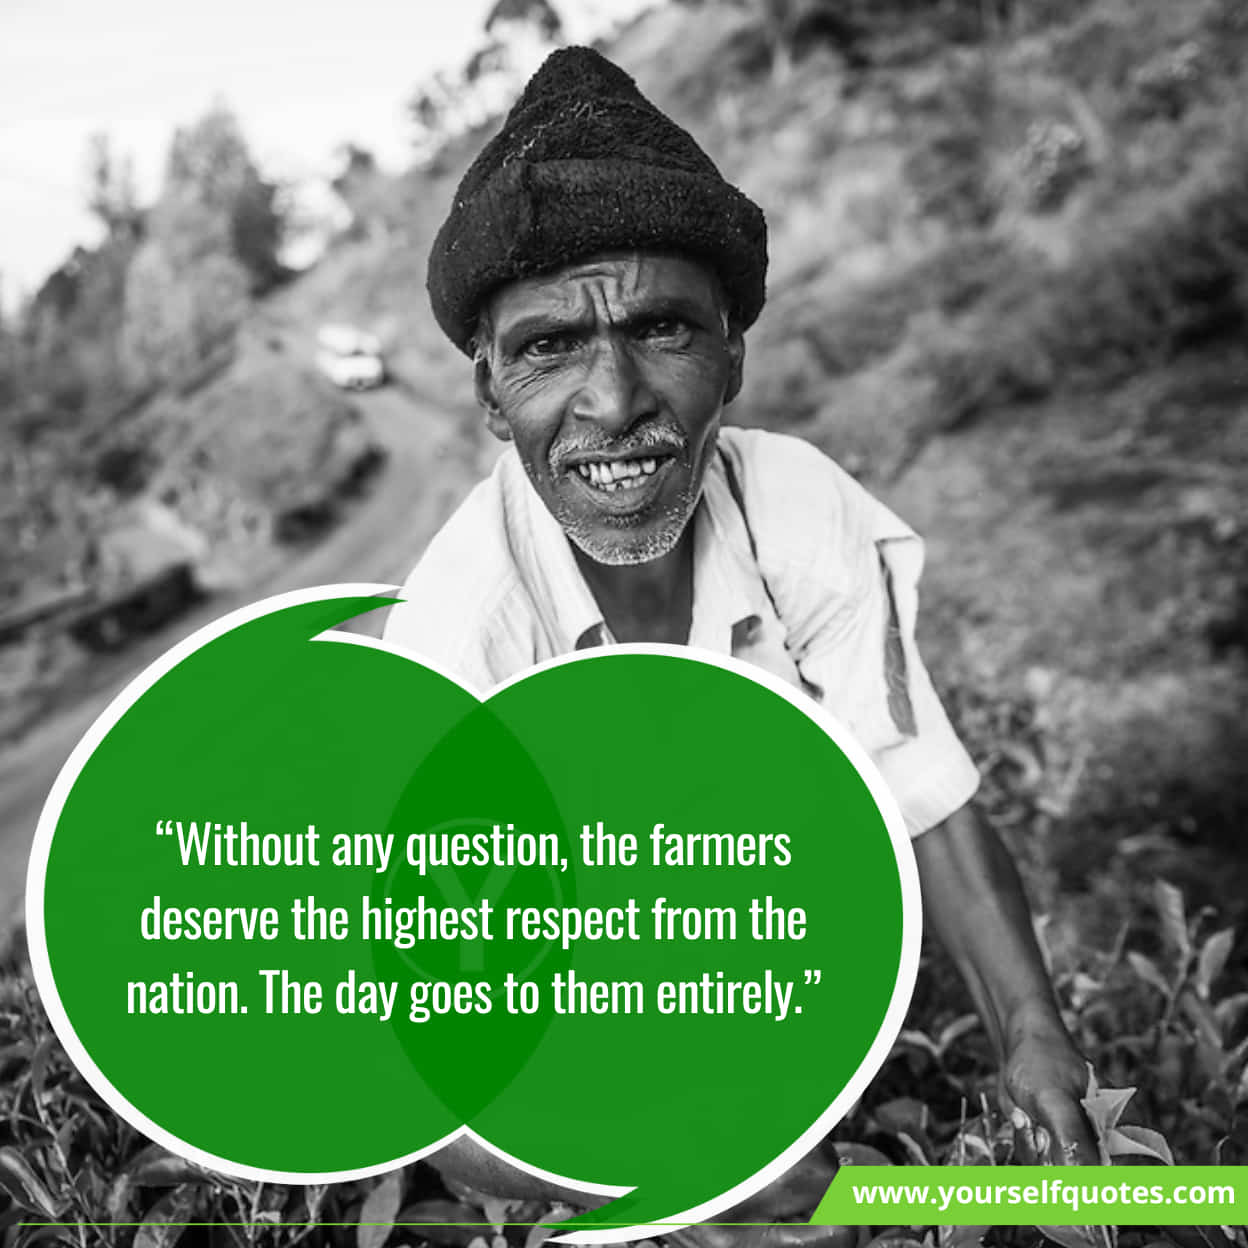 Kishan Diwas Farmers Day Quotes, Wishes